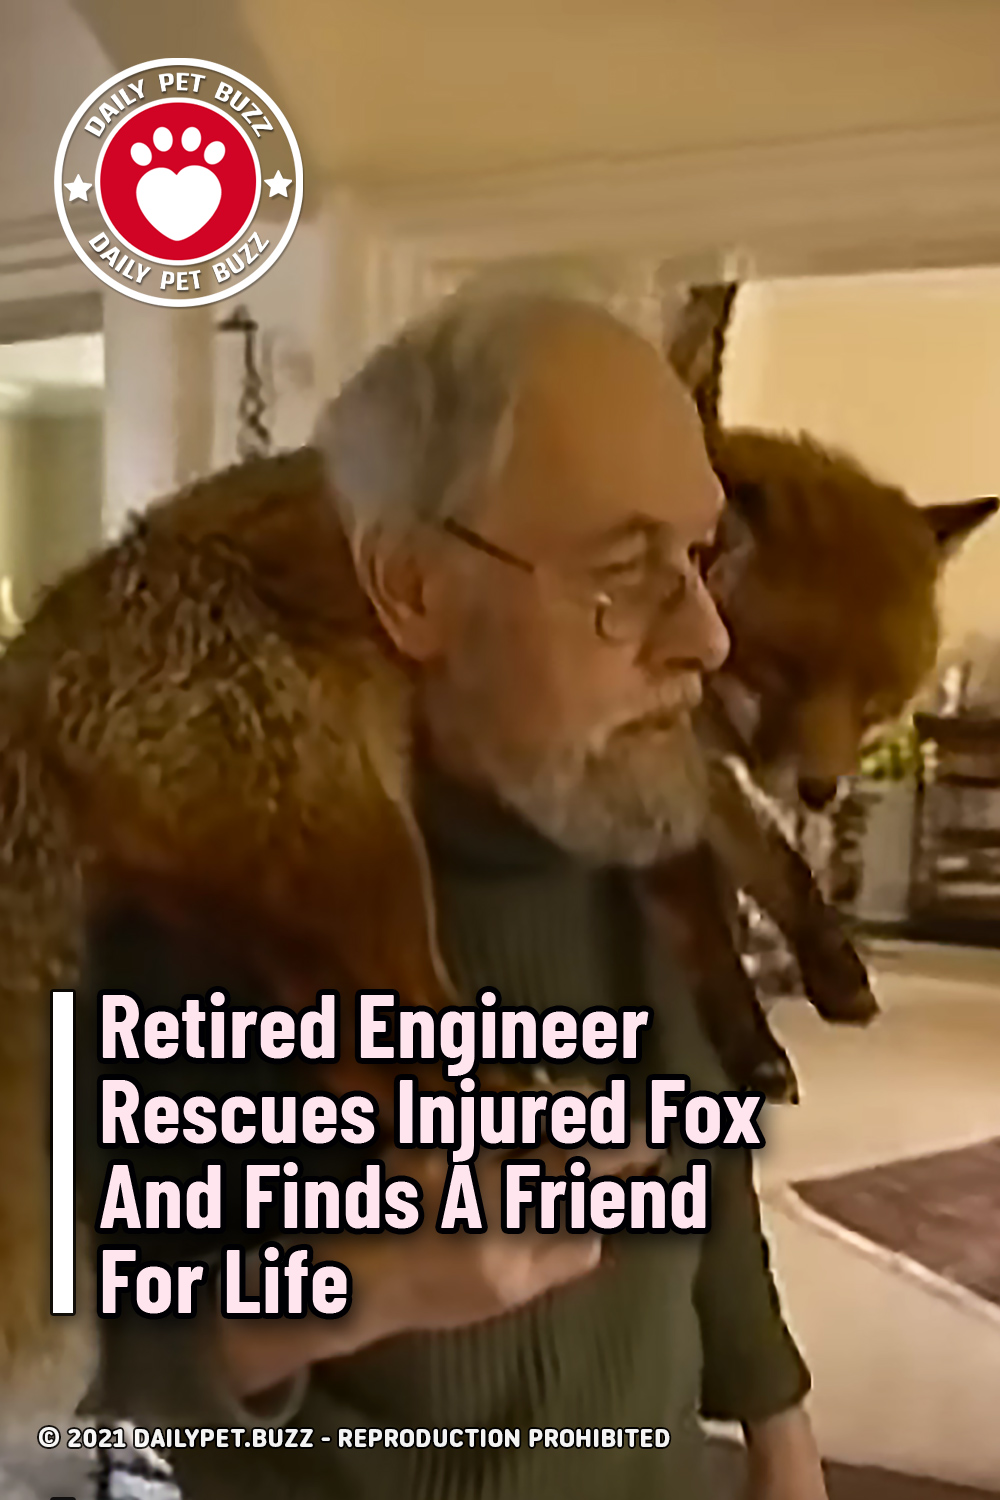 Retired Engineer Rescues Injured Fox And Finds A Friend For Life